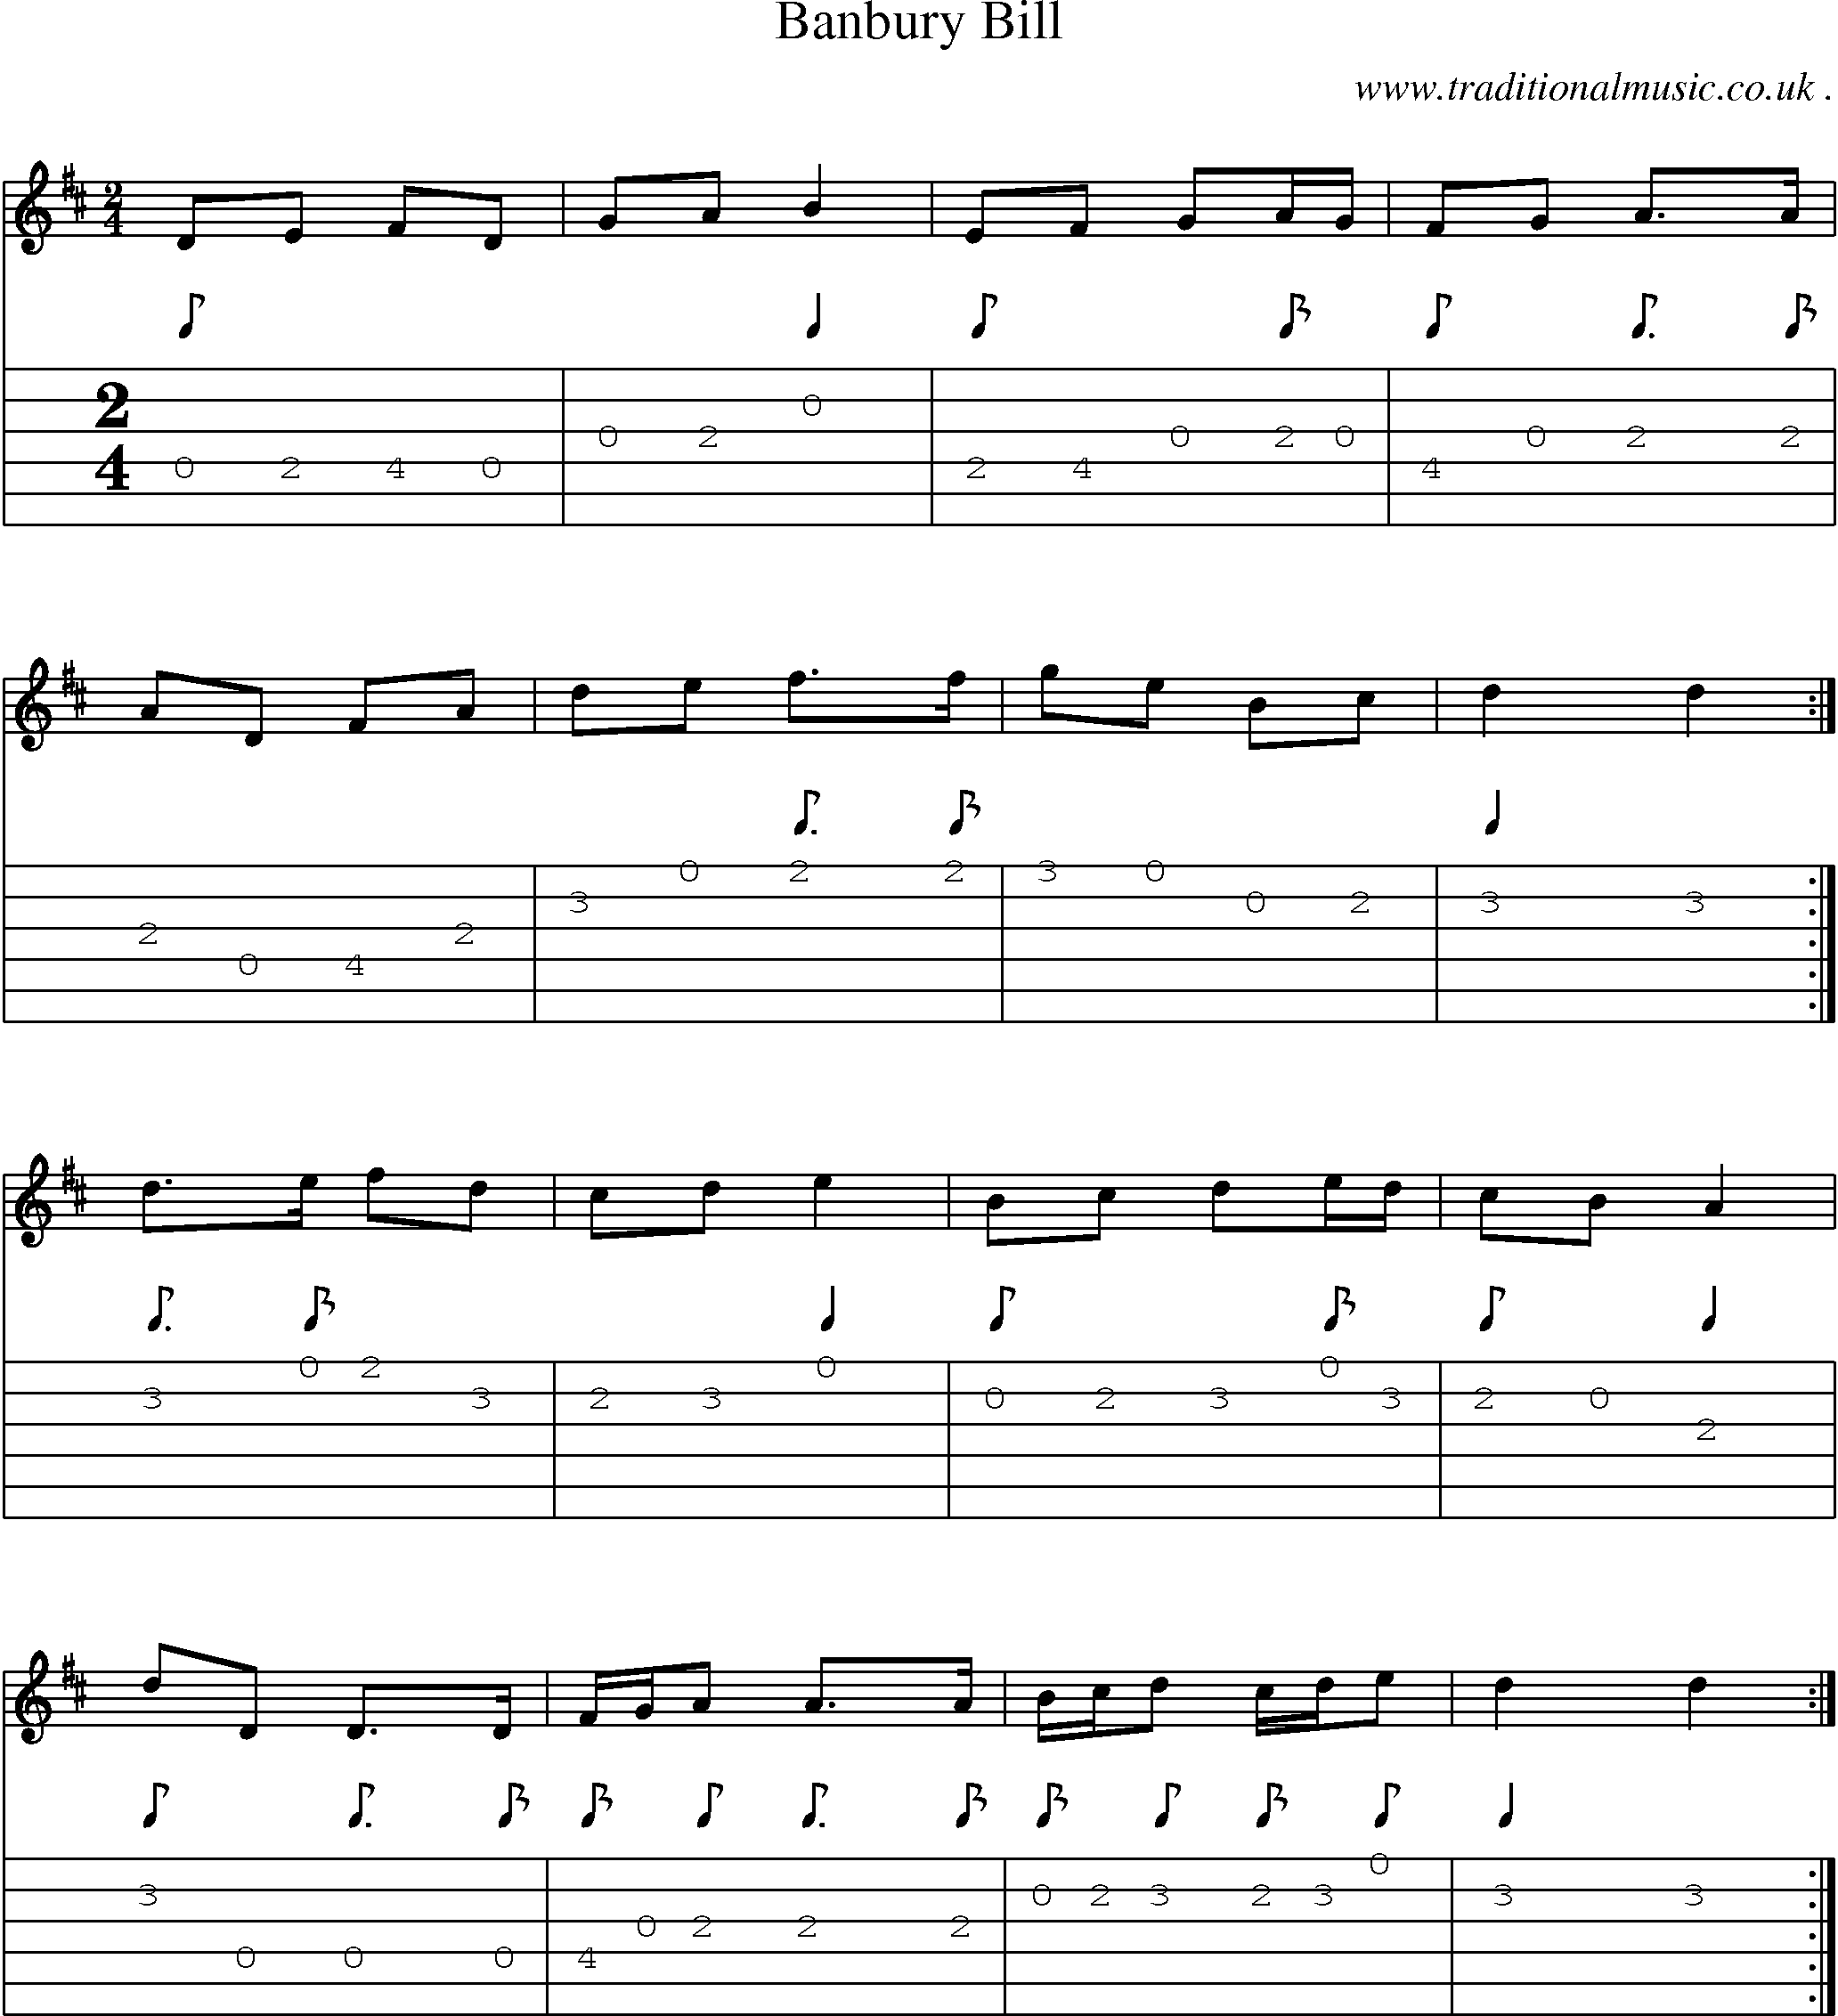 Sheet-music  score, Chords and Guitar Tabs for Banbury Bill